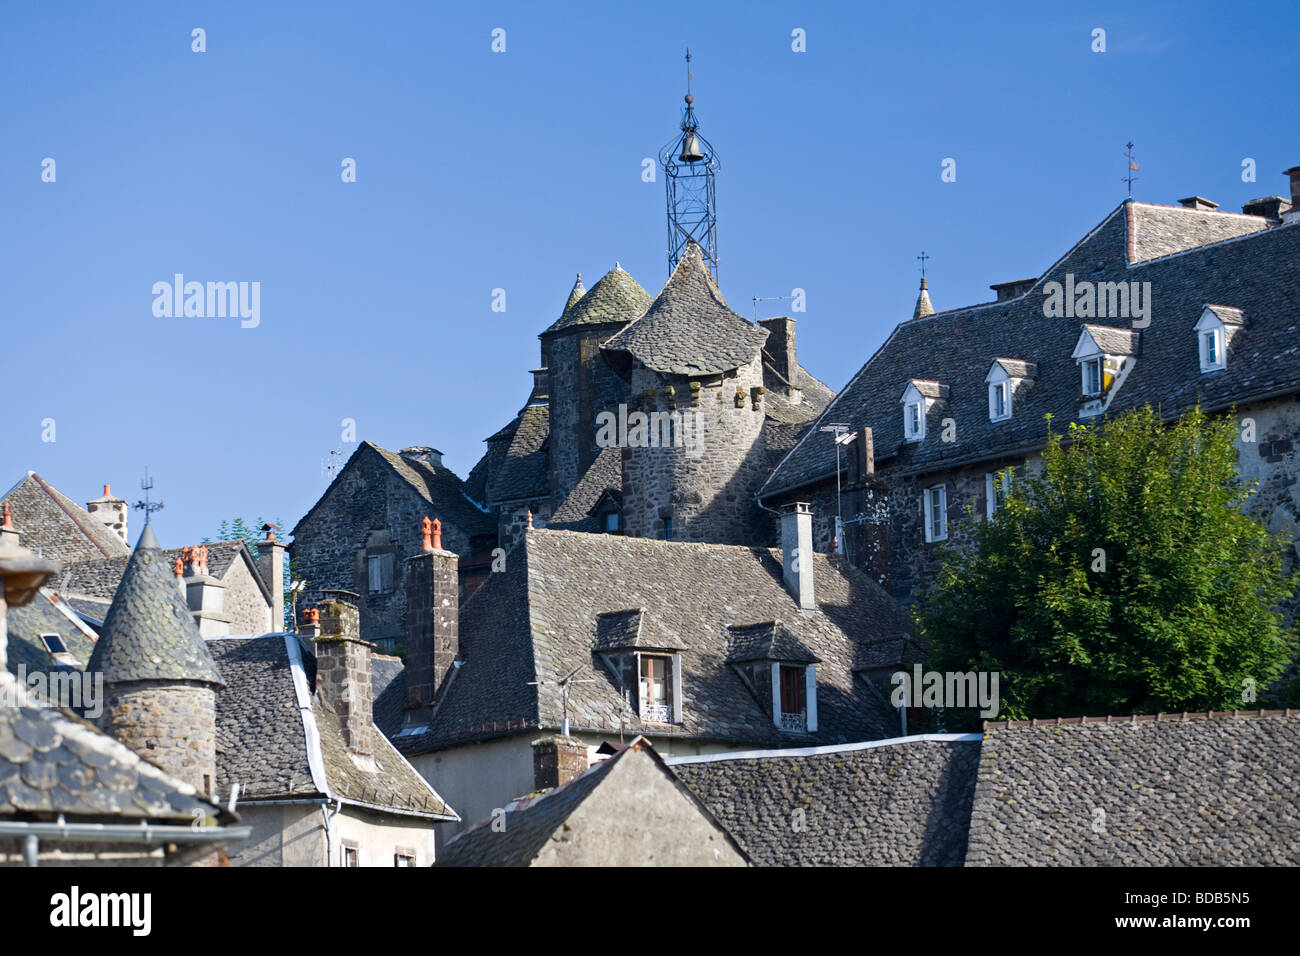 The village of Salers (Cantal),  presented as one of the most beautiful villages of France. Le village de Salers (France). Stock Photo